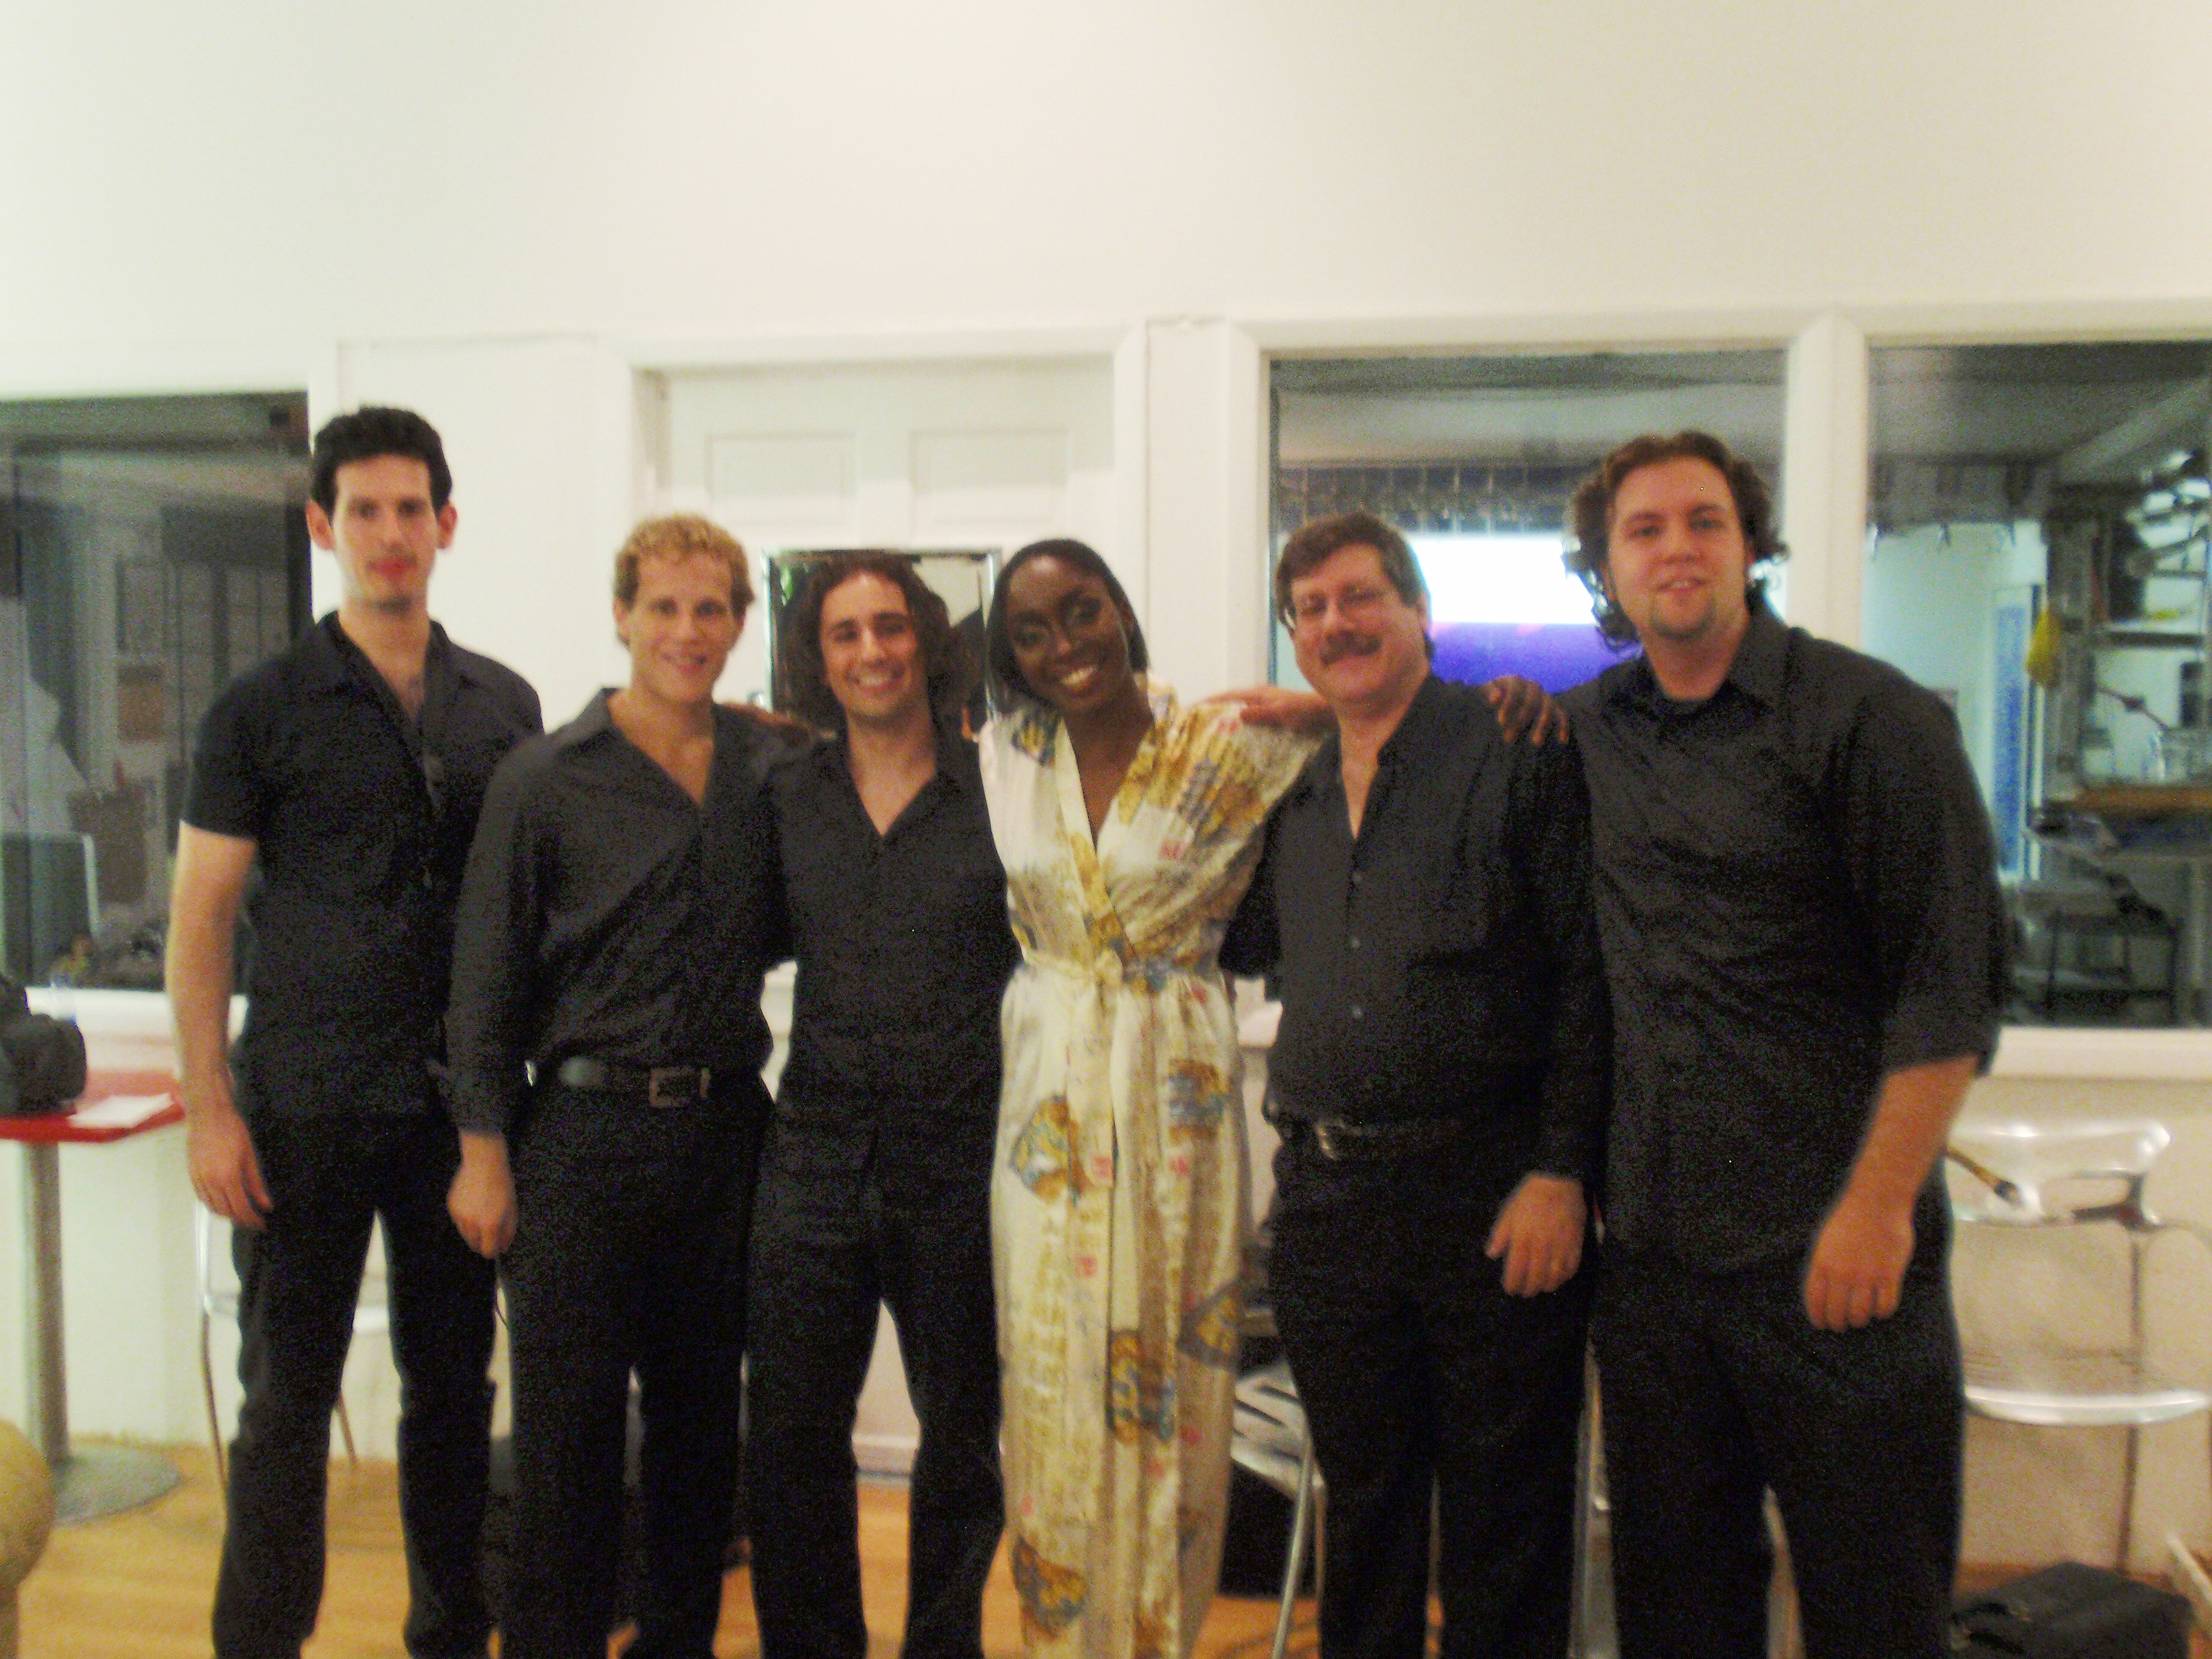 Patrick Pizzolorusso with Tinu and fellow Sax players on the set of 